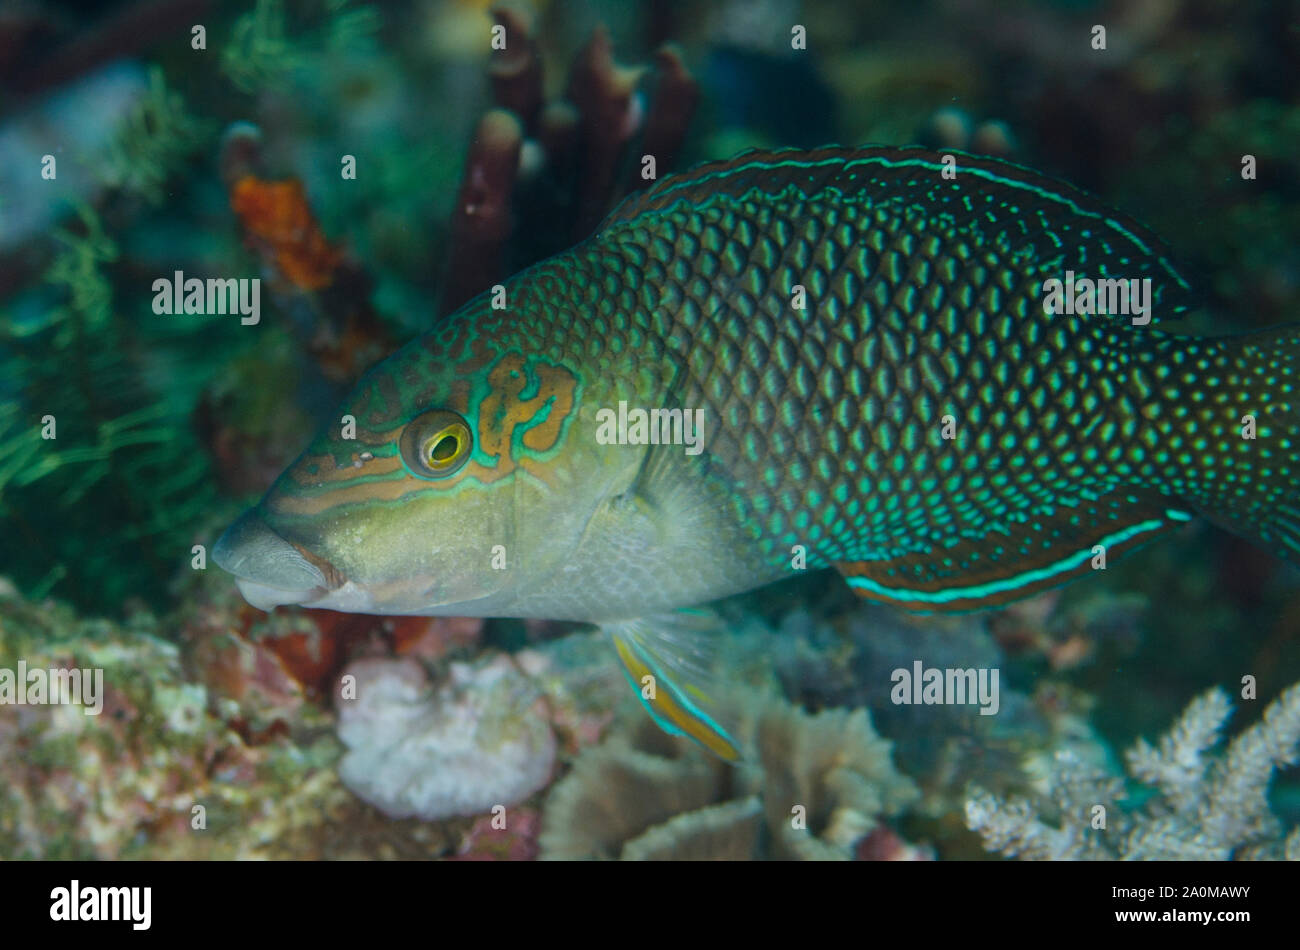 Male Geographic Wrasse, Anampses geographicus, Sebayor Point dive site, between Komodo and Flores Islands, Komodo National Park, Lesser Sunda Islands Stock Photo